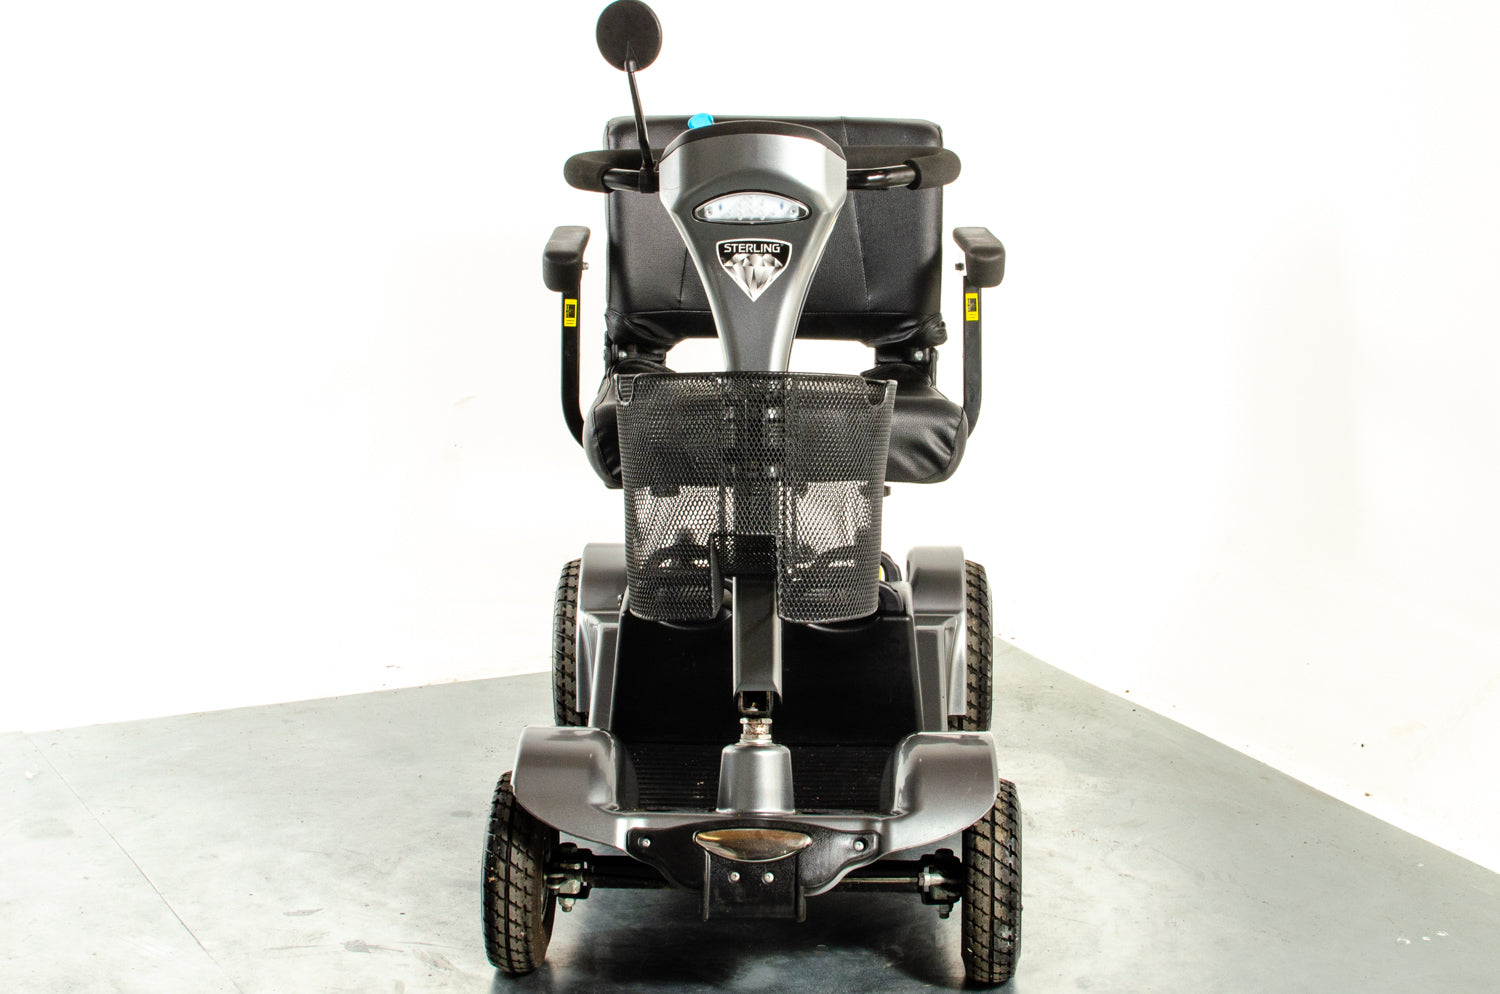 Sterling Sapphire 2 Used Mobility Scooter Midsize Transportable Pneumatic Tyres Folding Boot Grey